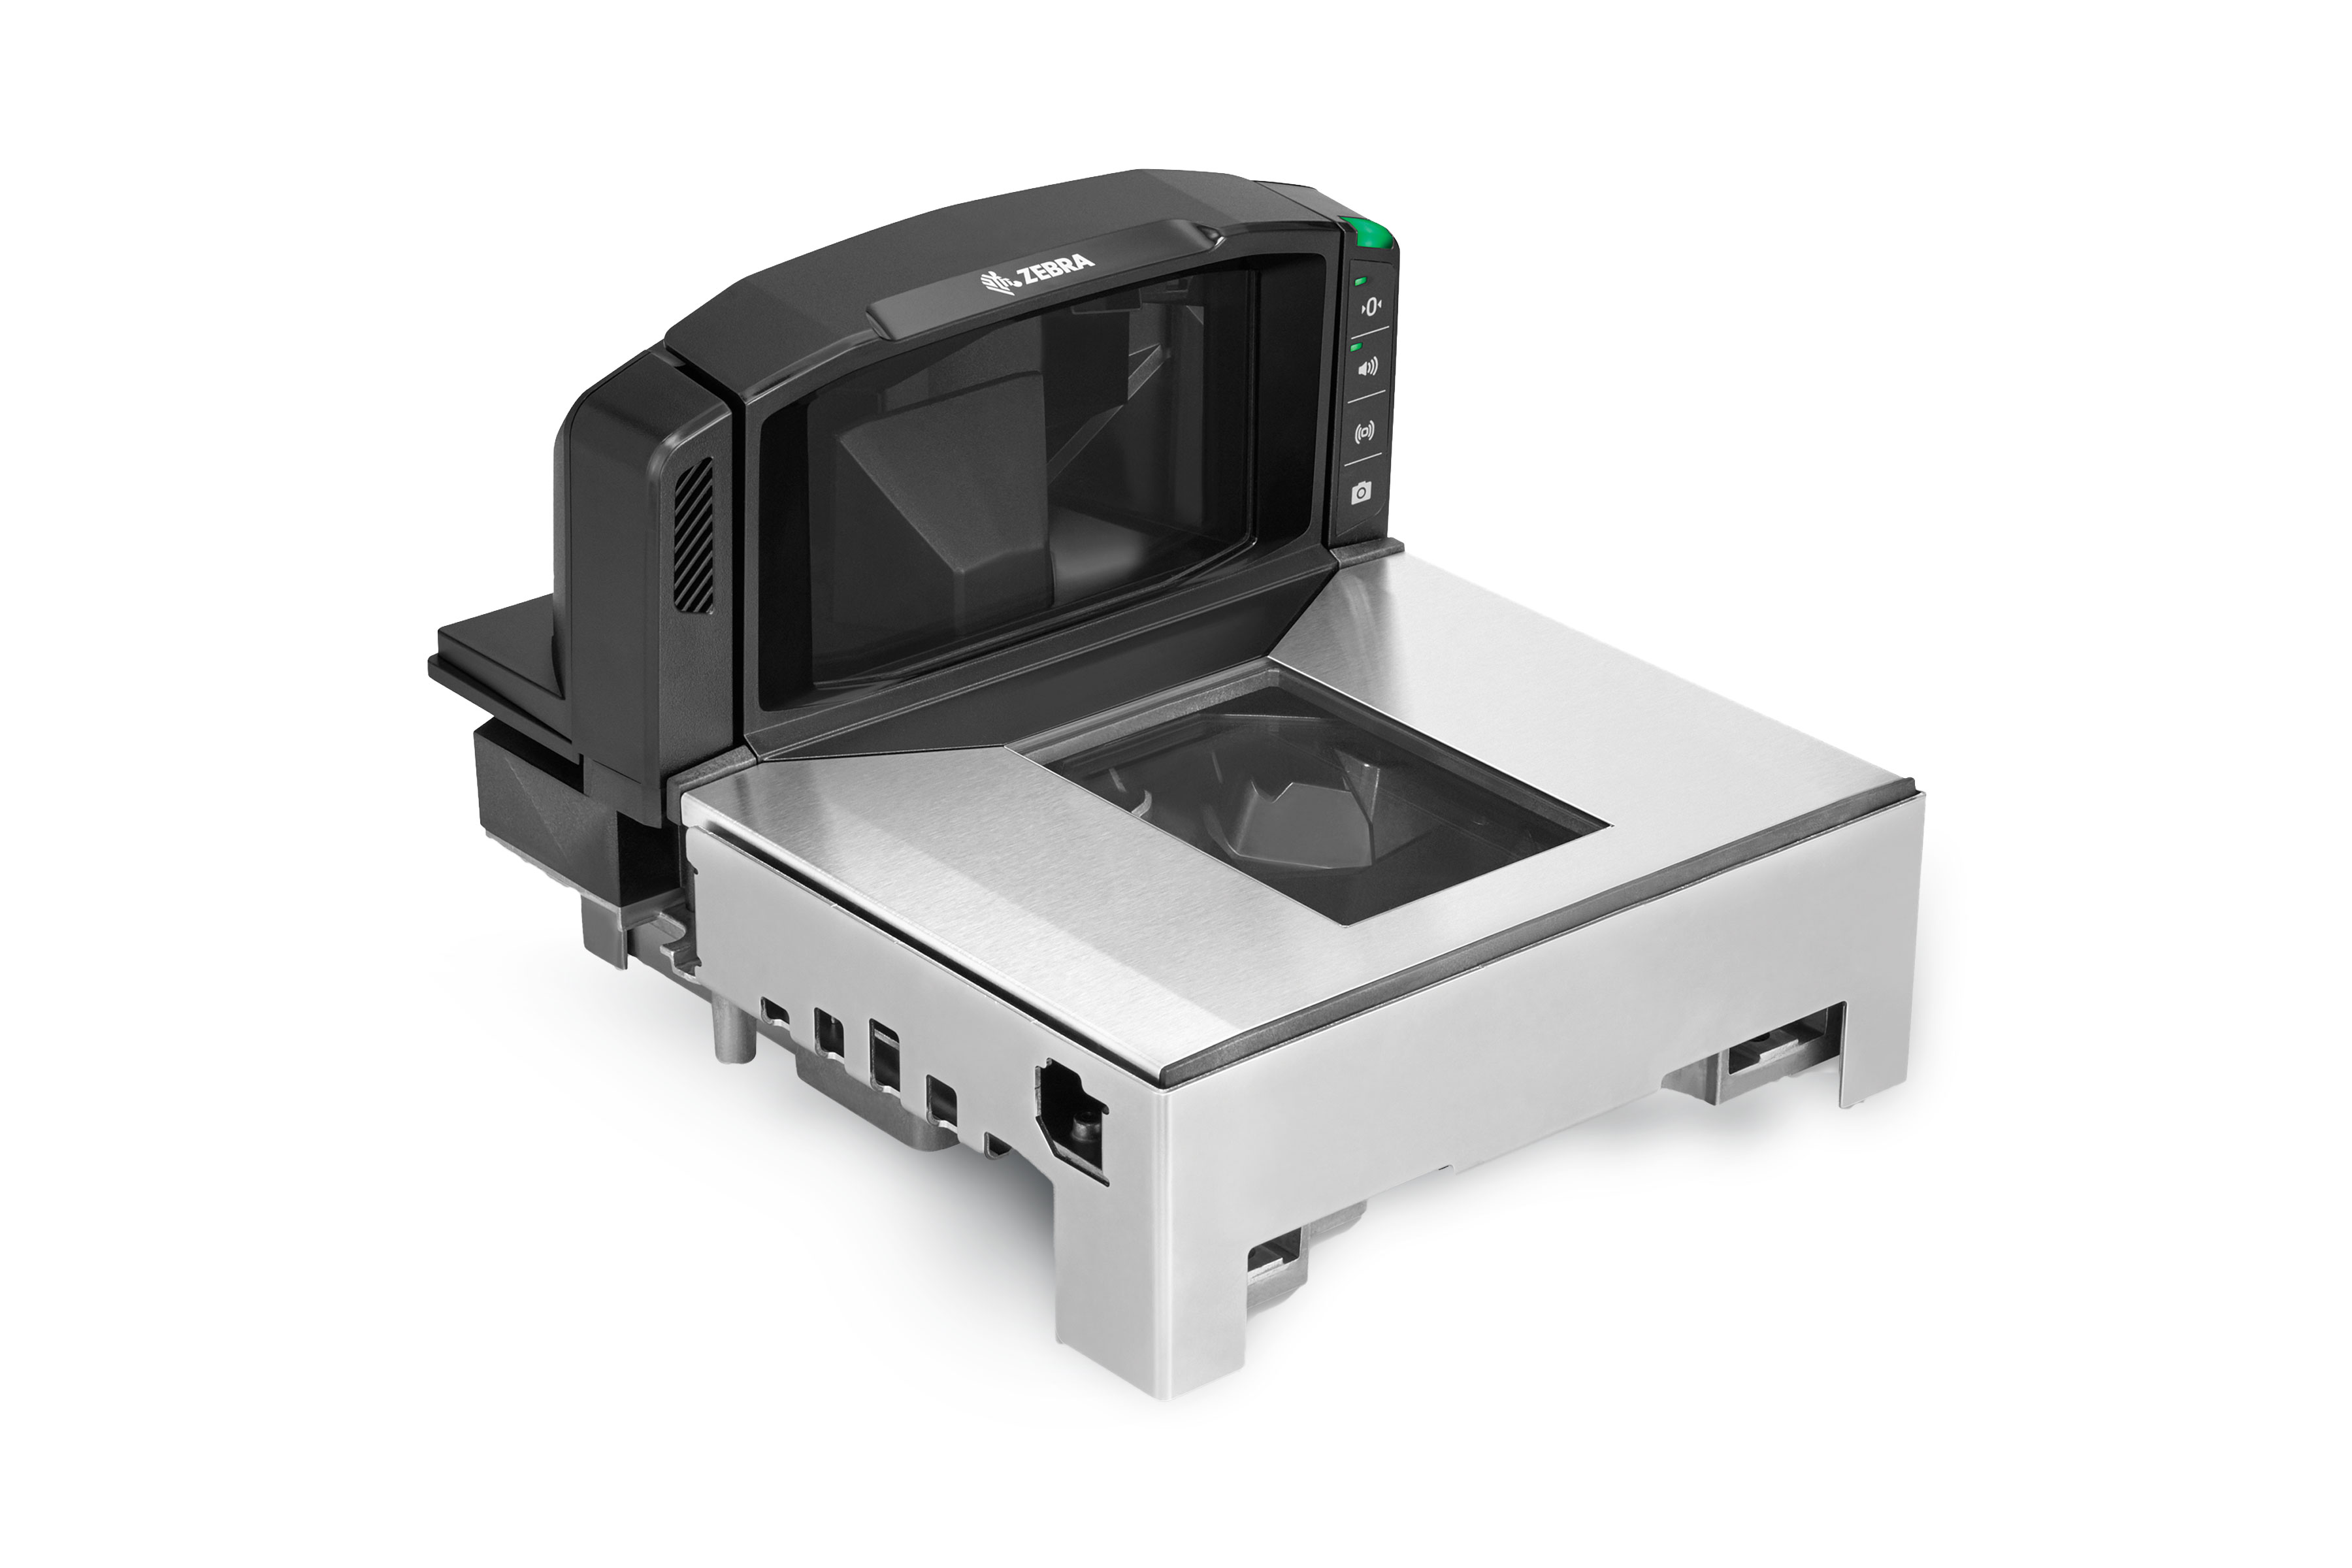 Zebra MP7000 grocery scanner scale, featuring a multi-plane 1D/2D imager